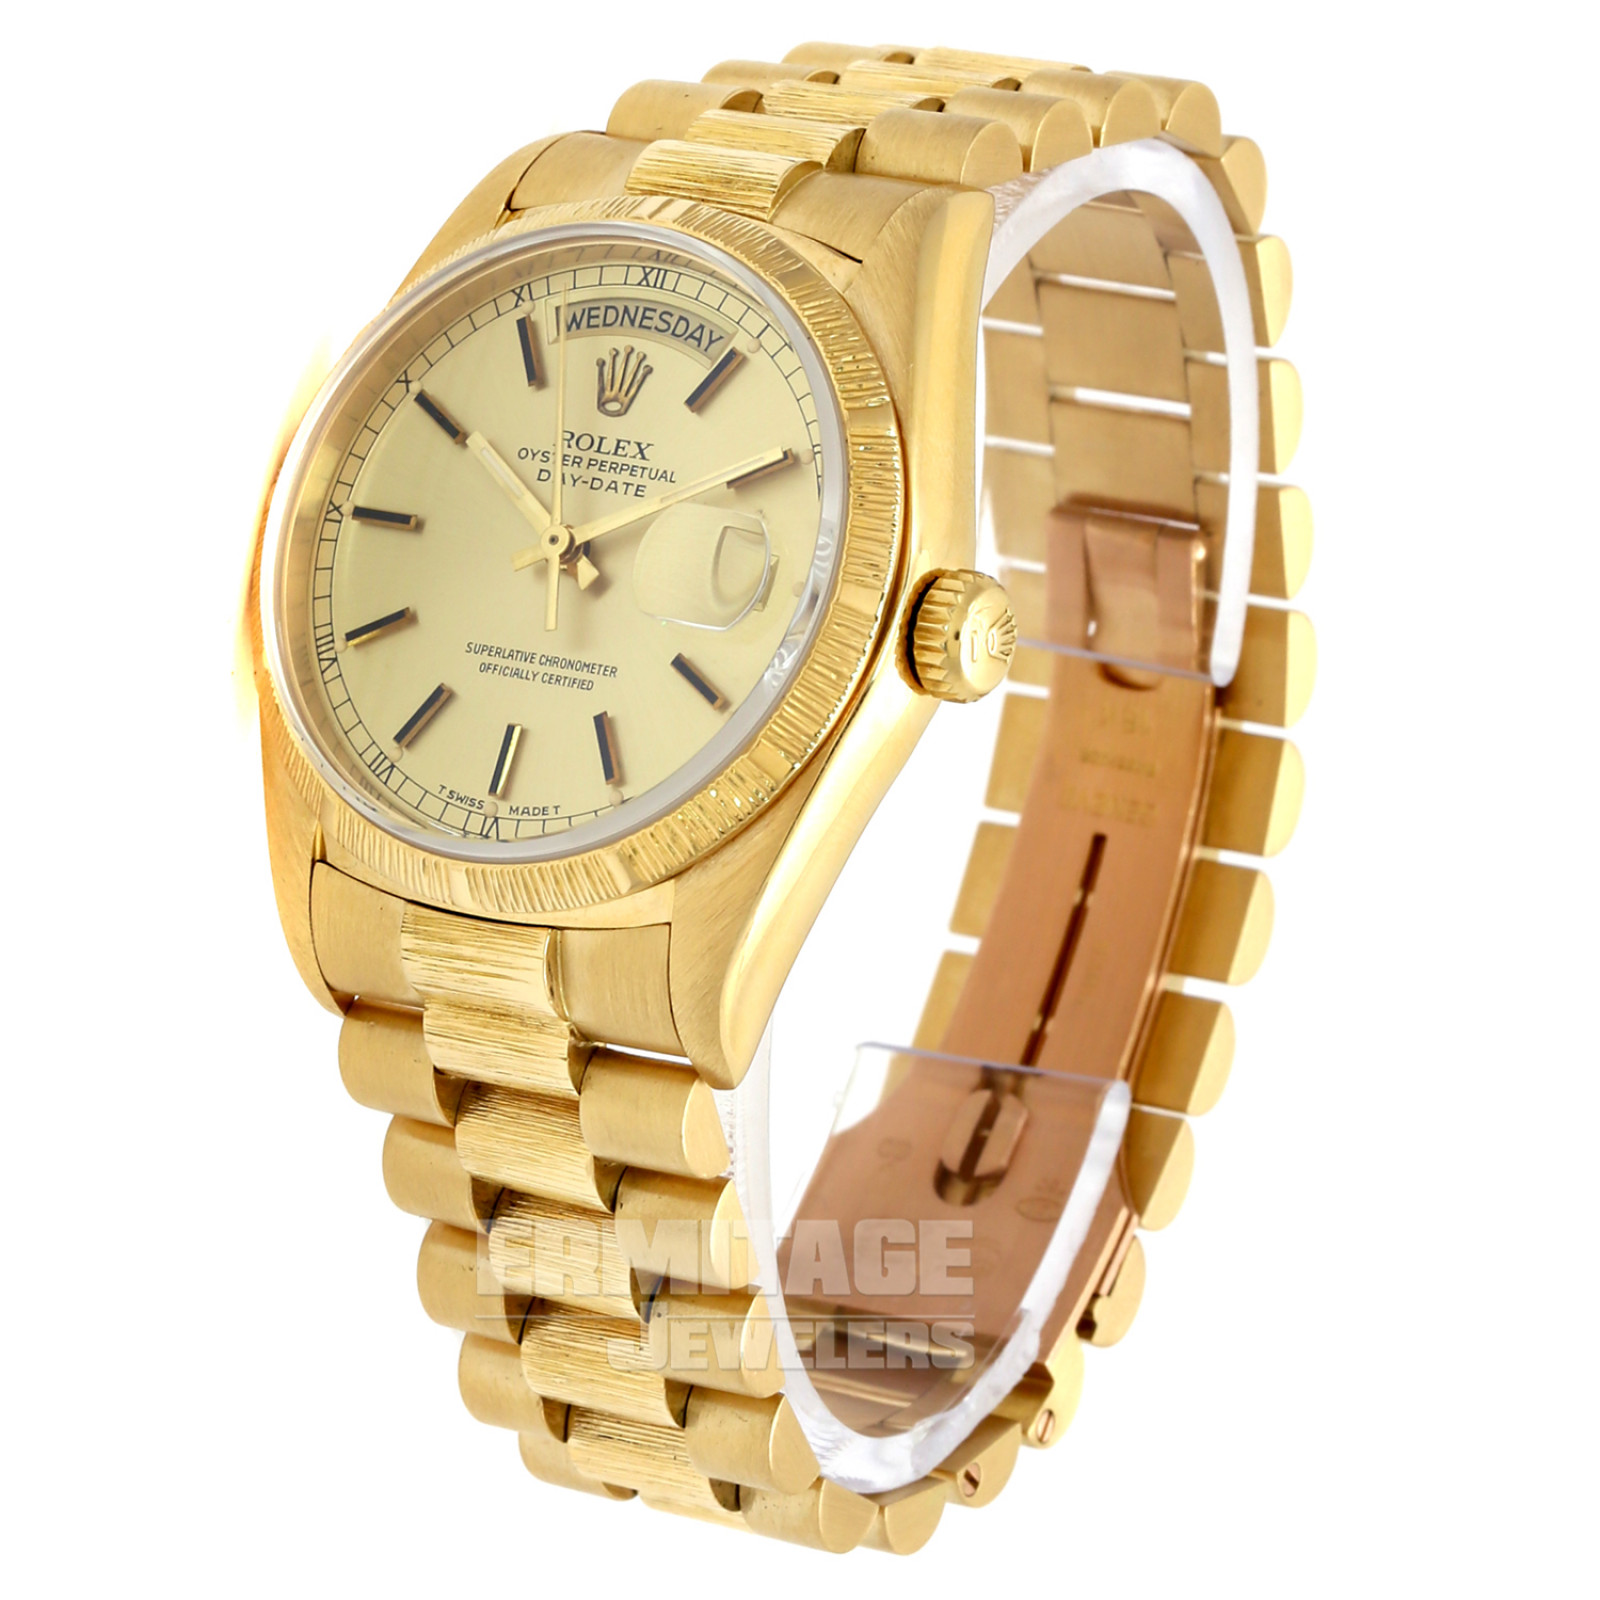 brug Bliv forvirret Sociale Studier Gold on President with Bark Finish Rolex Day-Date 18078 36 mm | Ermitage  Jewelers